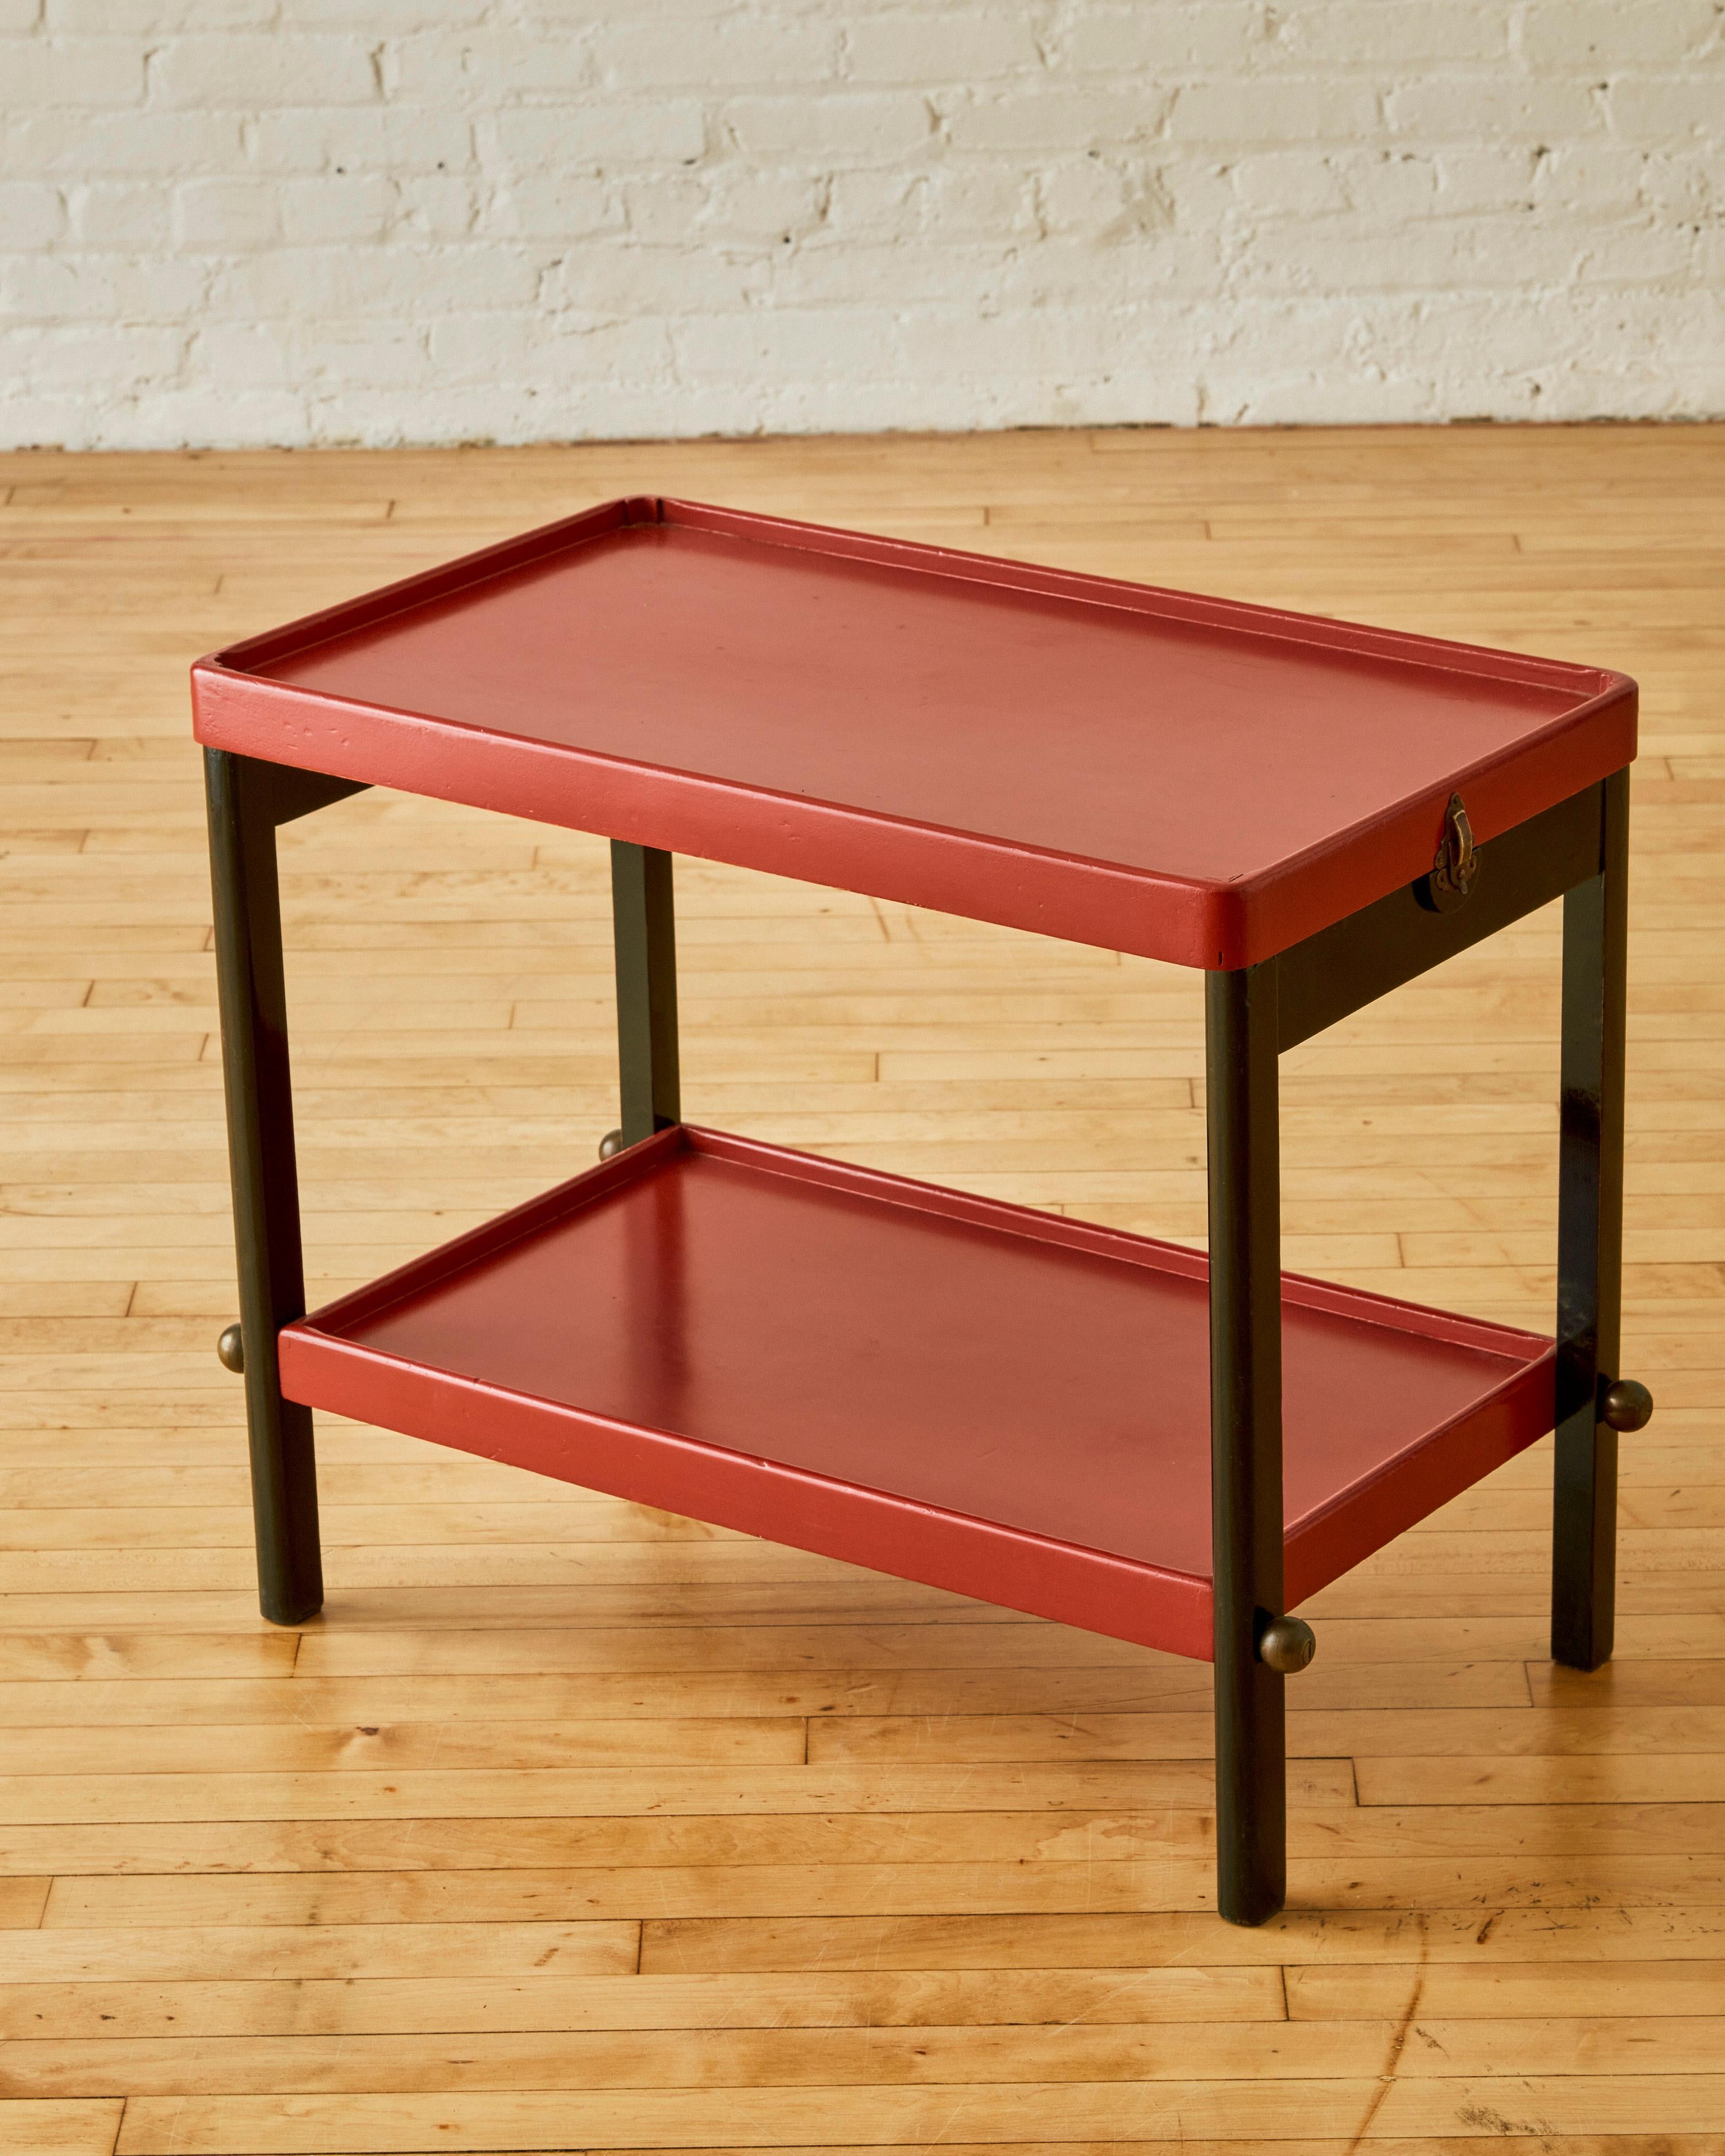 Red Lacquer Wood Side Table with bronze spherical details on the legs and latches that detach to reveal a removable tray top.

